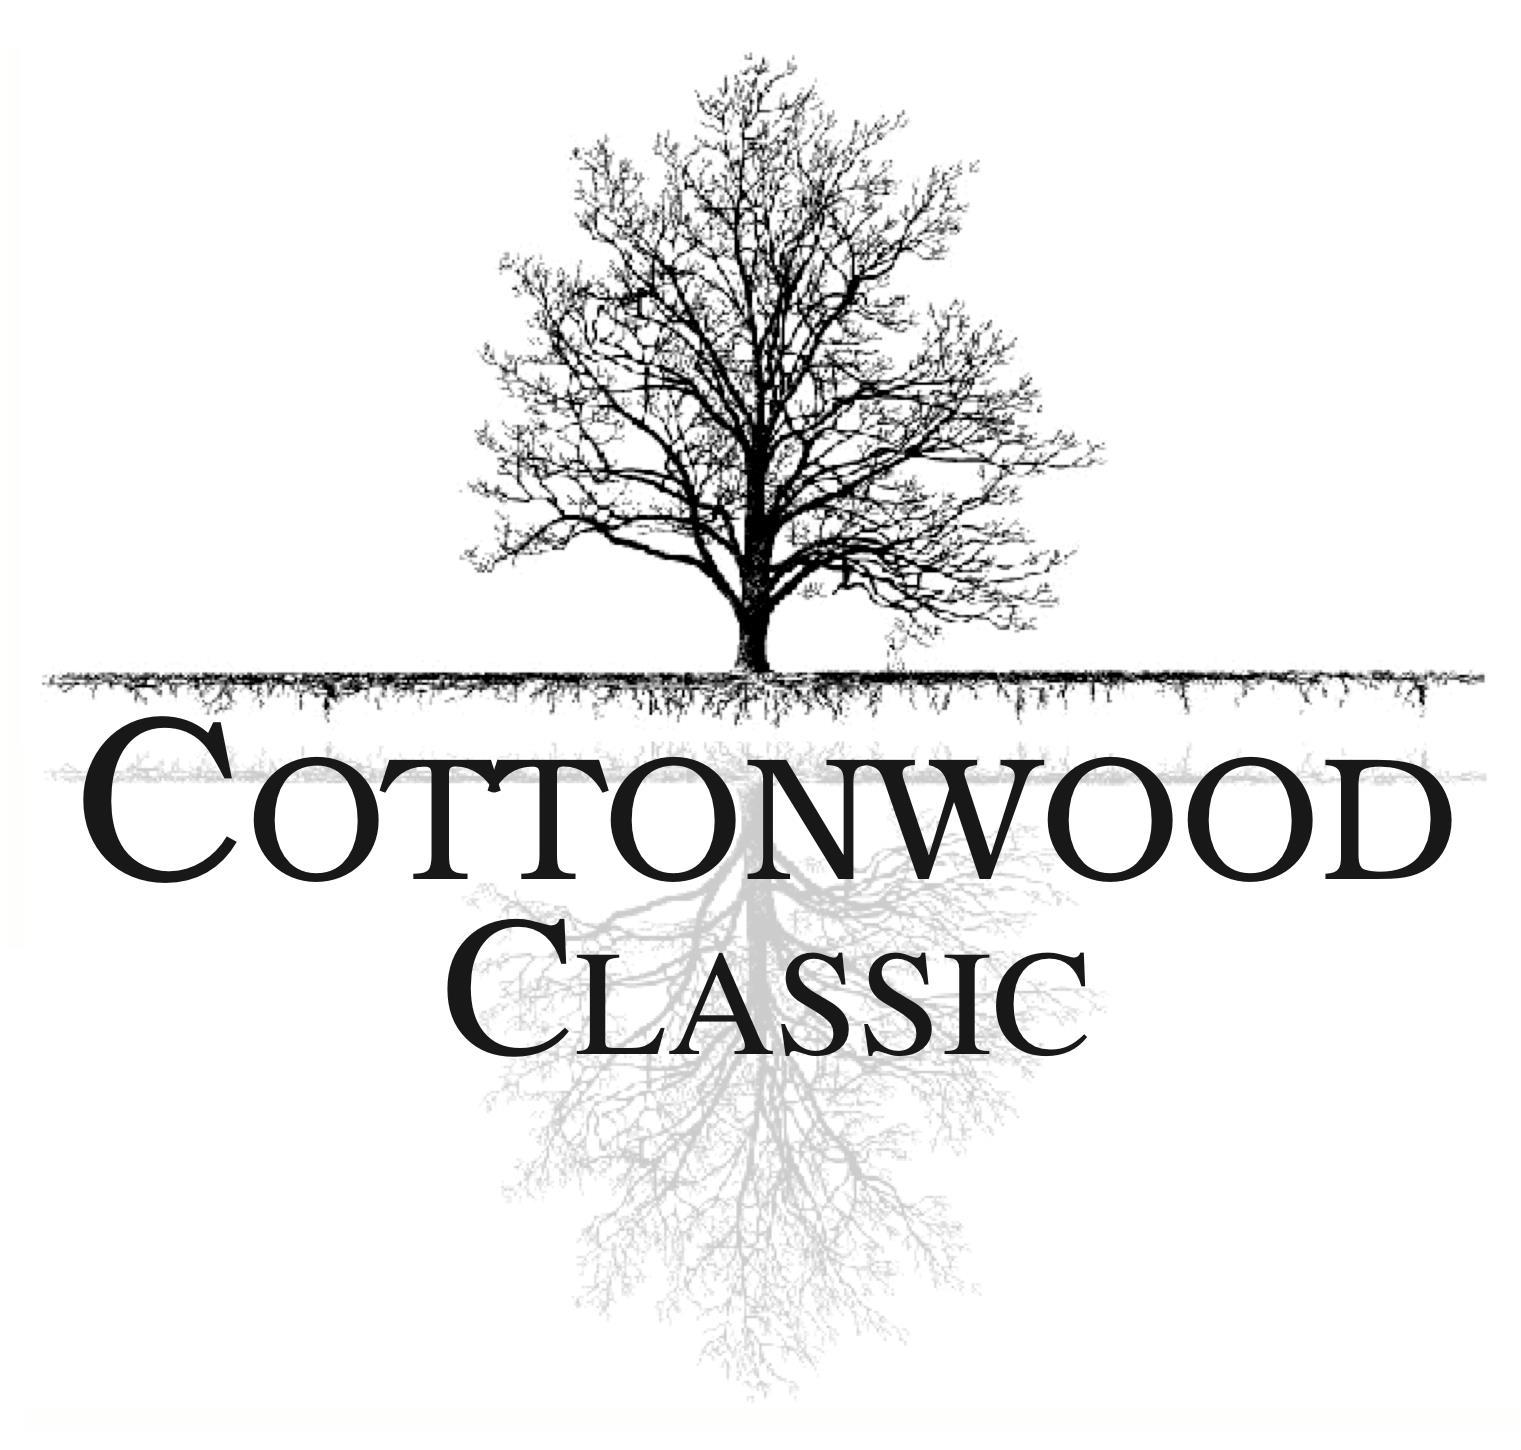 Event Promo Photo For Cottonwood Classic - KQHA Show